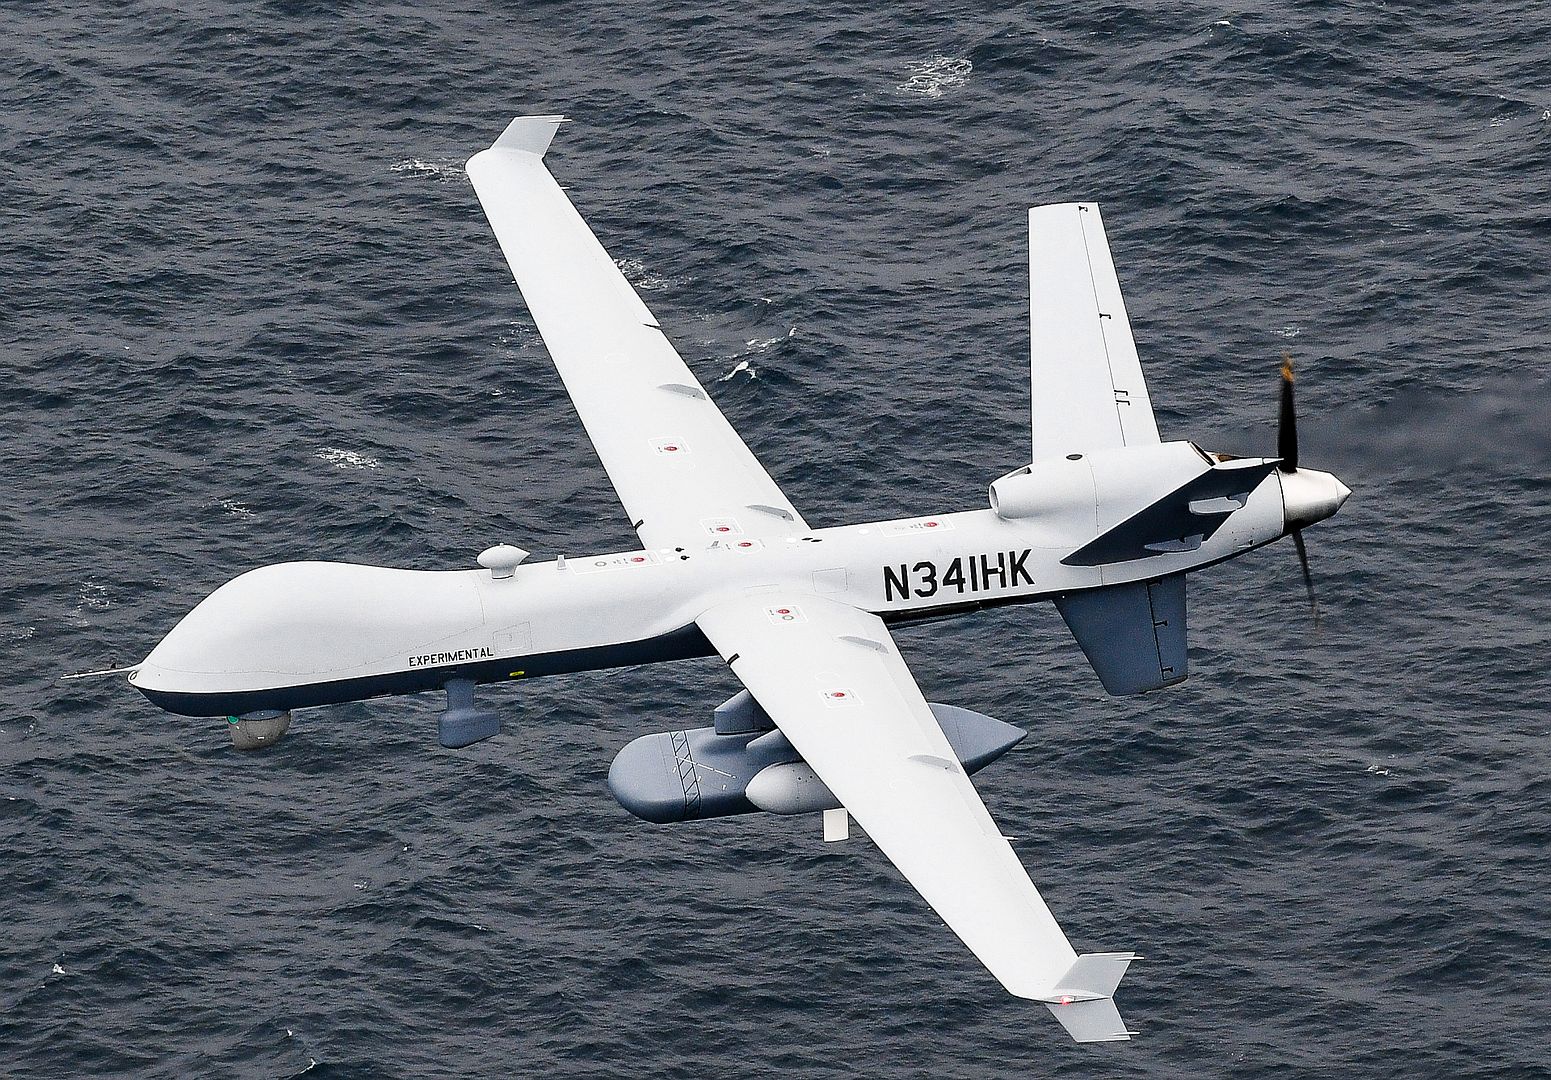 9 Sea Guardian Unmanned Maritime Surveillance Aircraft System Flies Over The Pacific Ocean